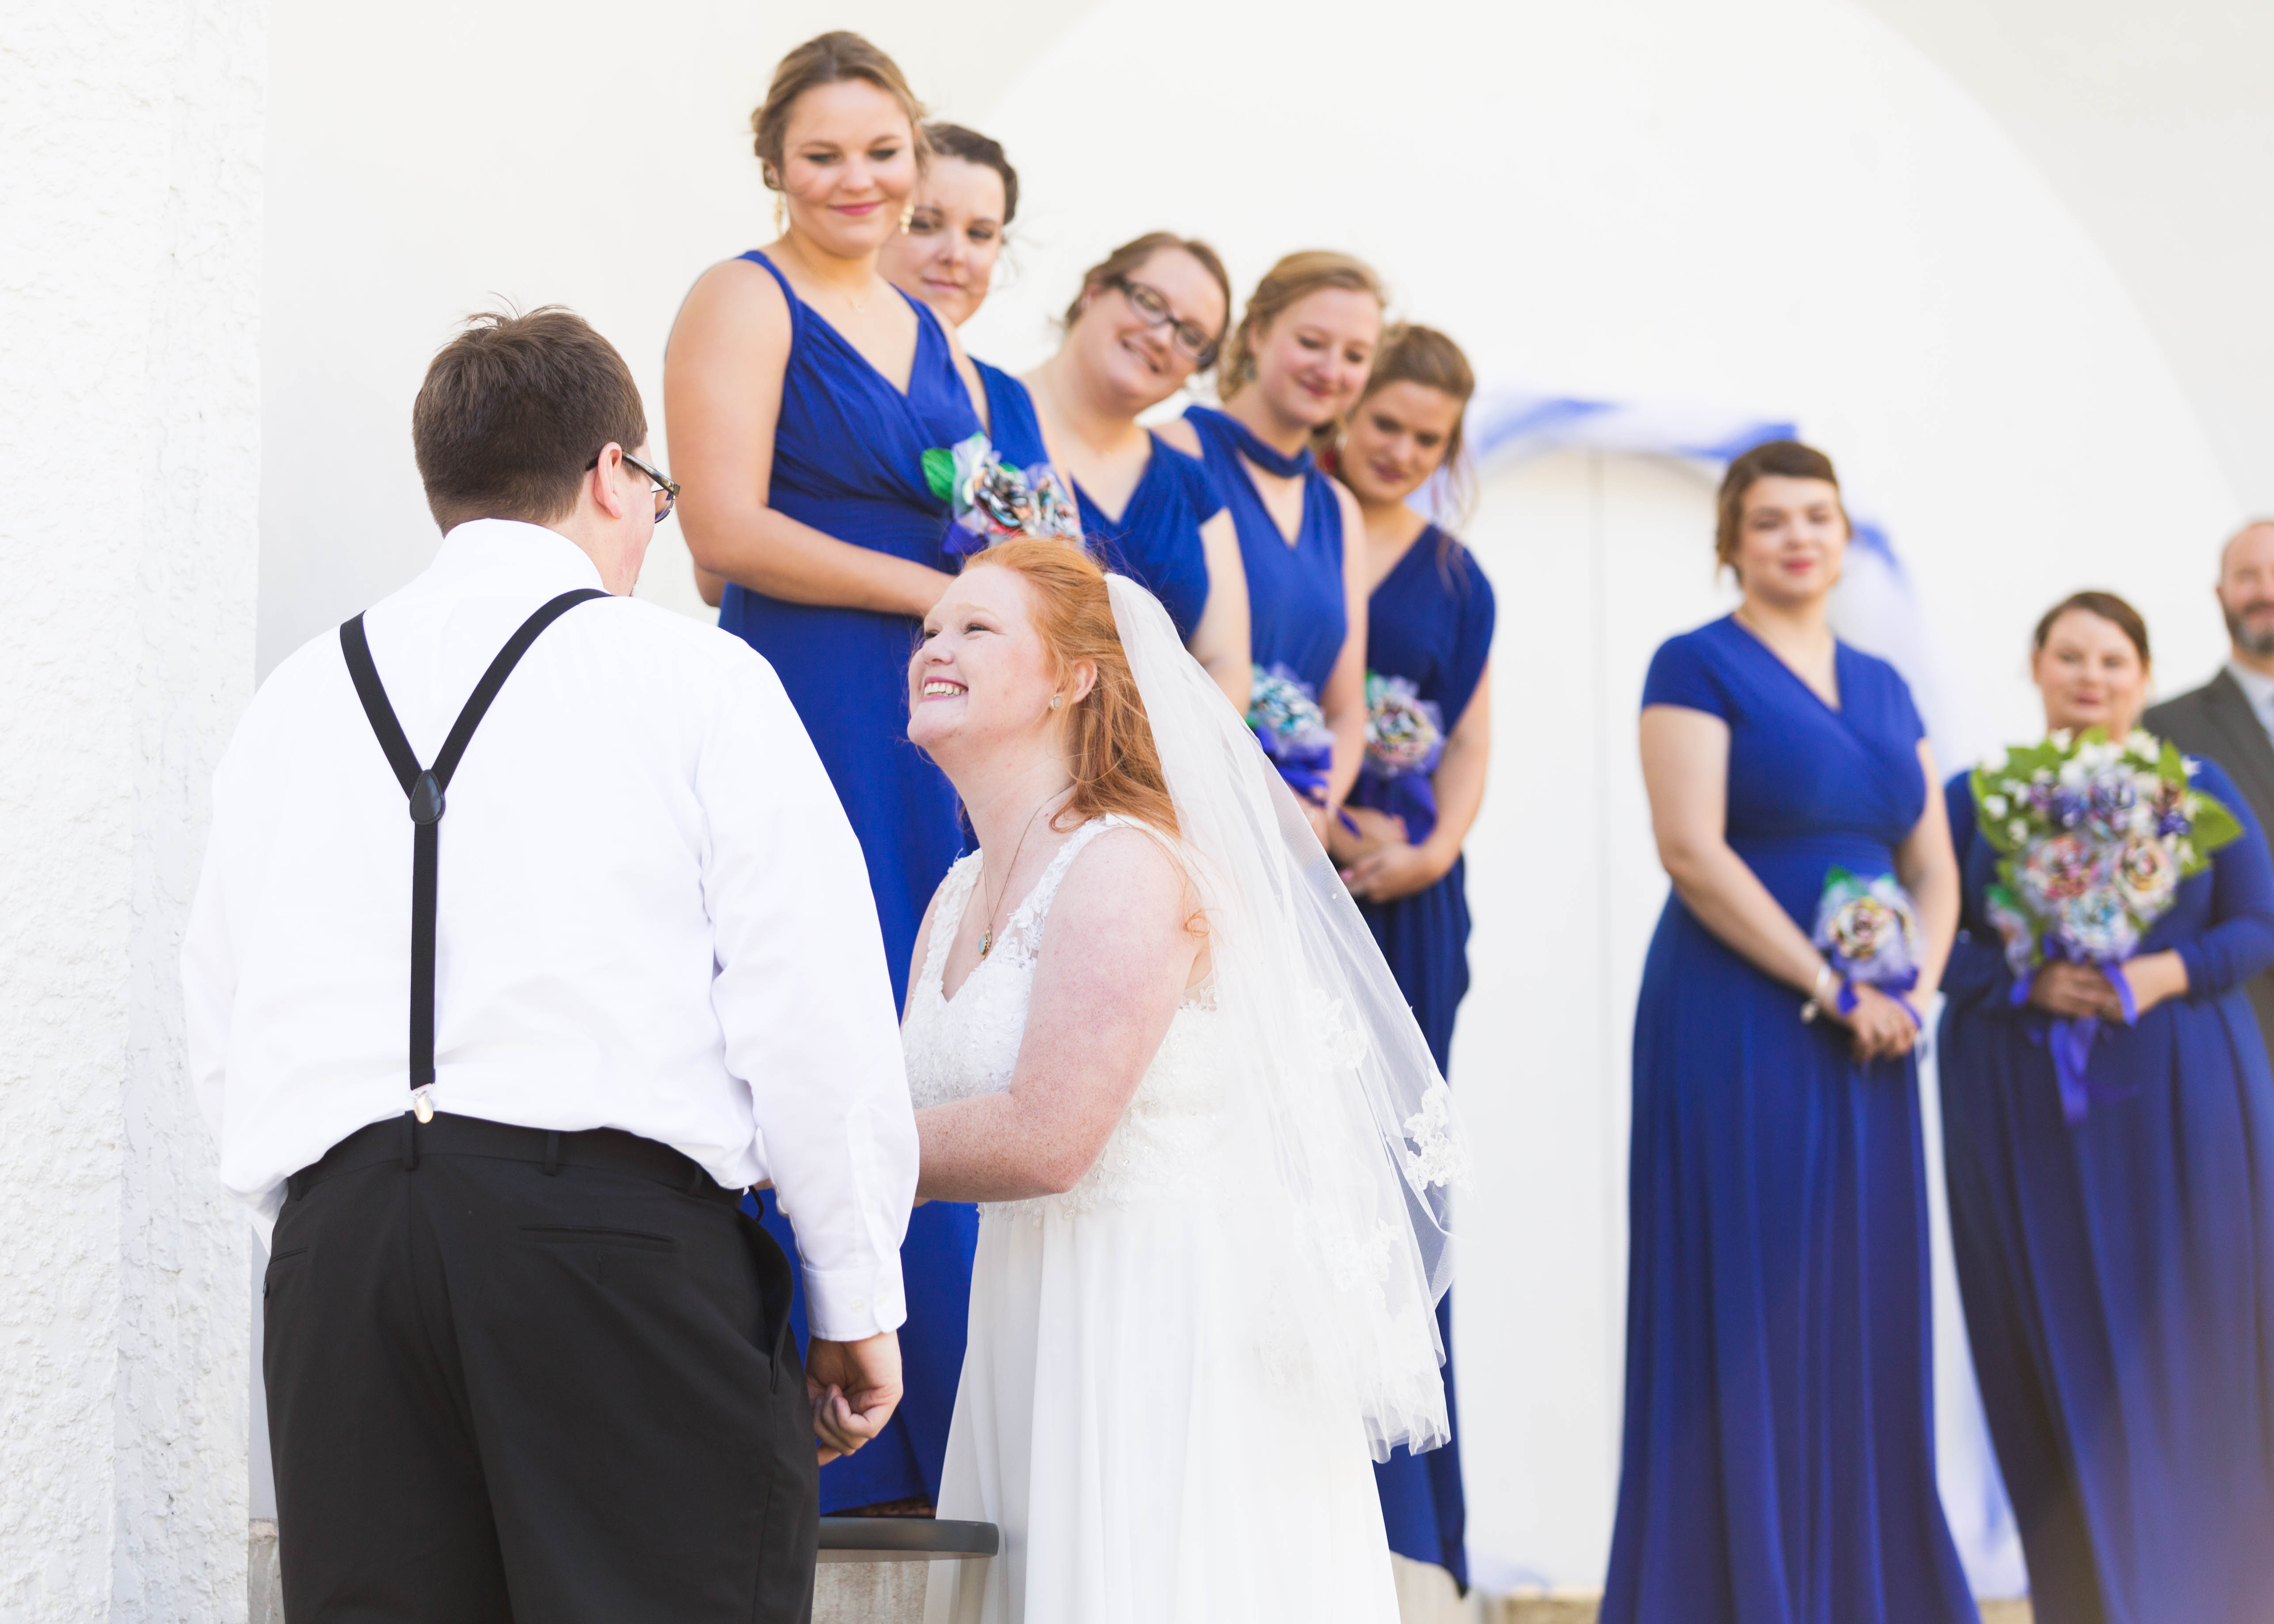 bridesmaids watch as bride smiles as she shares communion with groom n